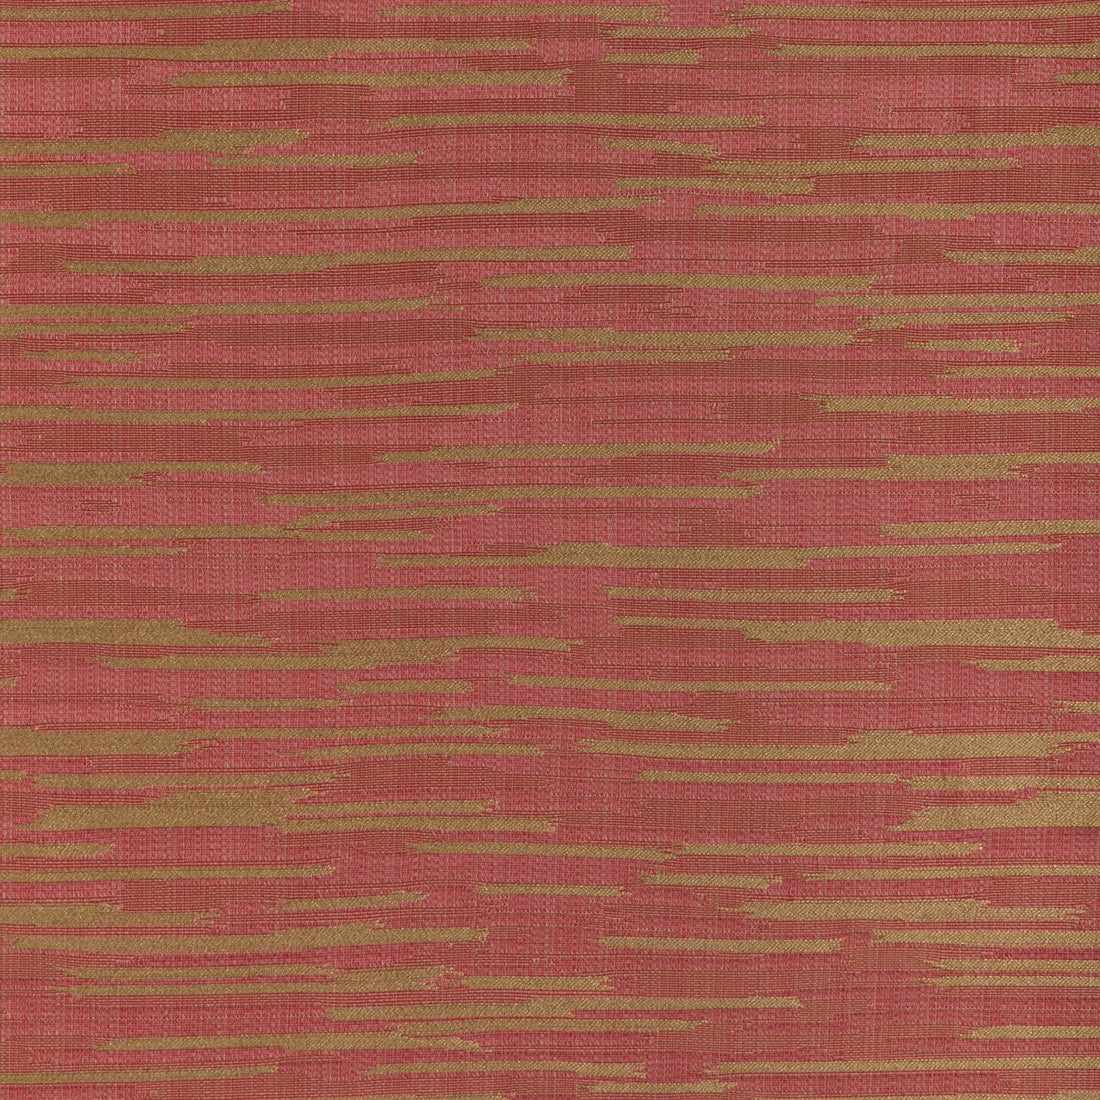 Arles Weave fabric in petal color - pattern 8023134.716.0 - by Brunschwig &amp; Fils in the Arles Weaves collection